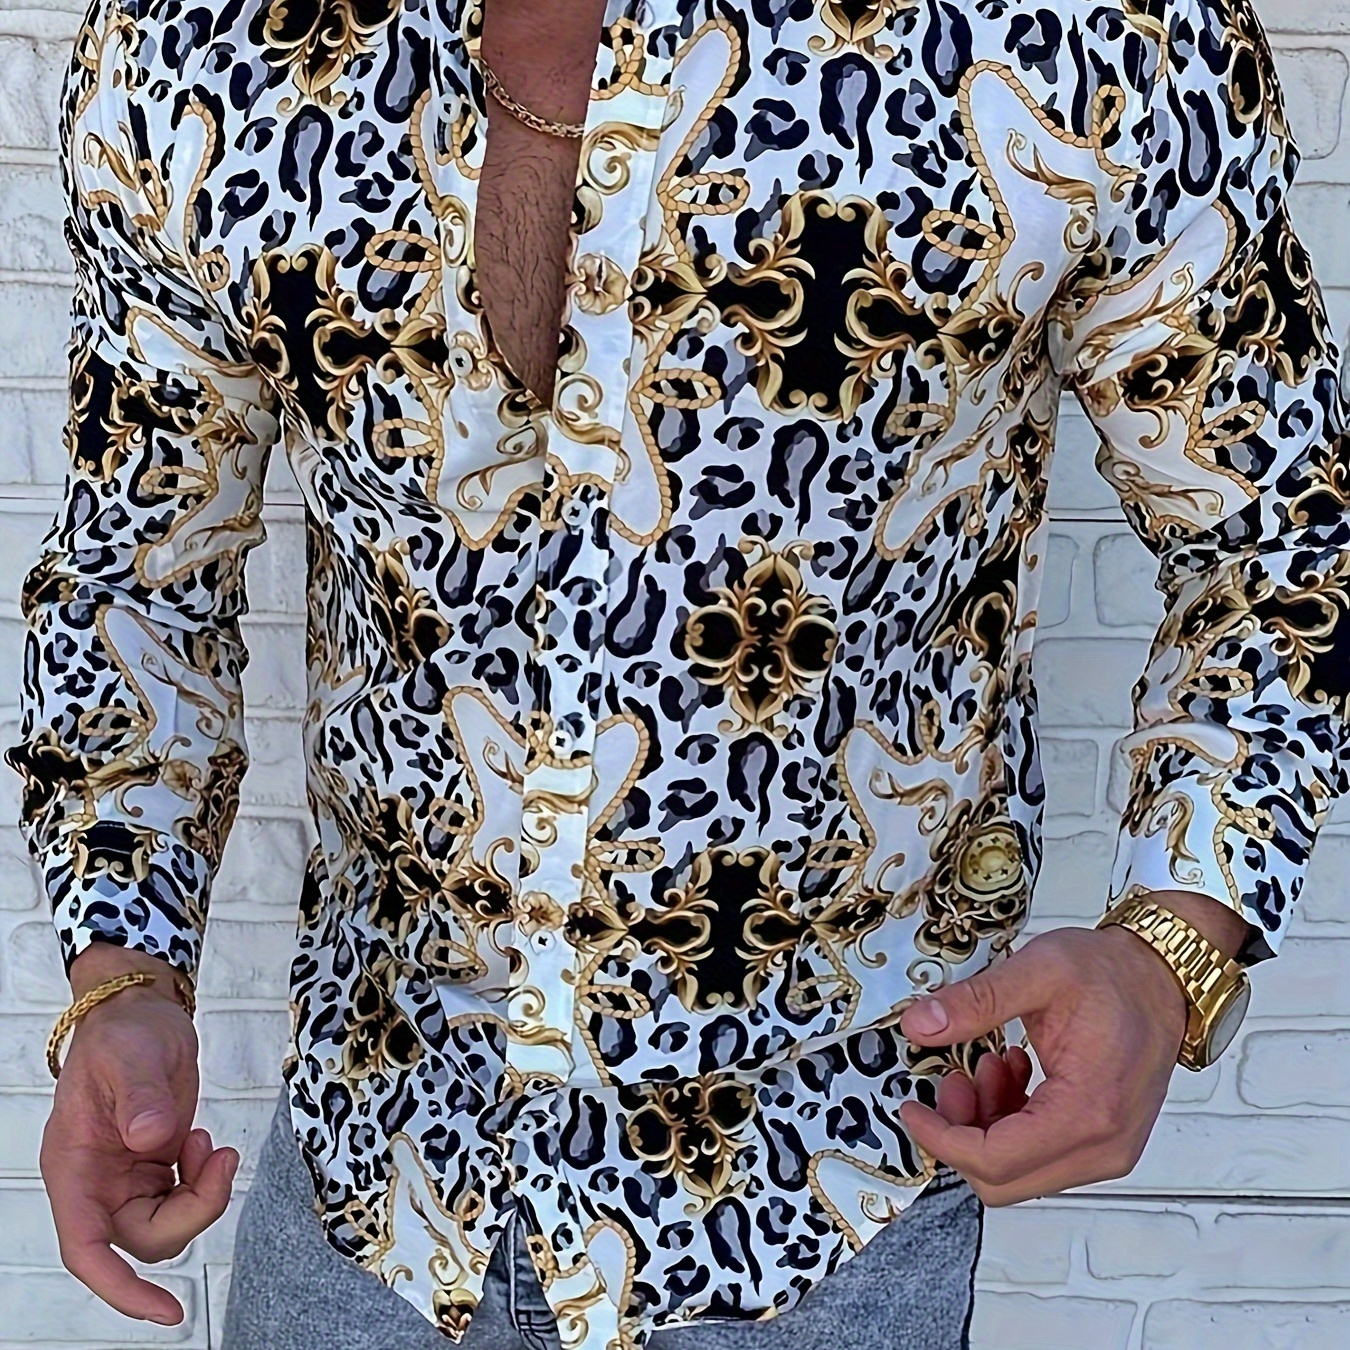 

Leopard Print Men's Baroque Style Vintage Long Sleeve Button Down Shirt For Spring Fall, Party Banquet